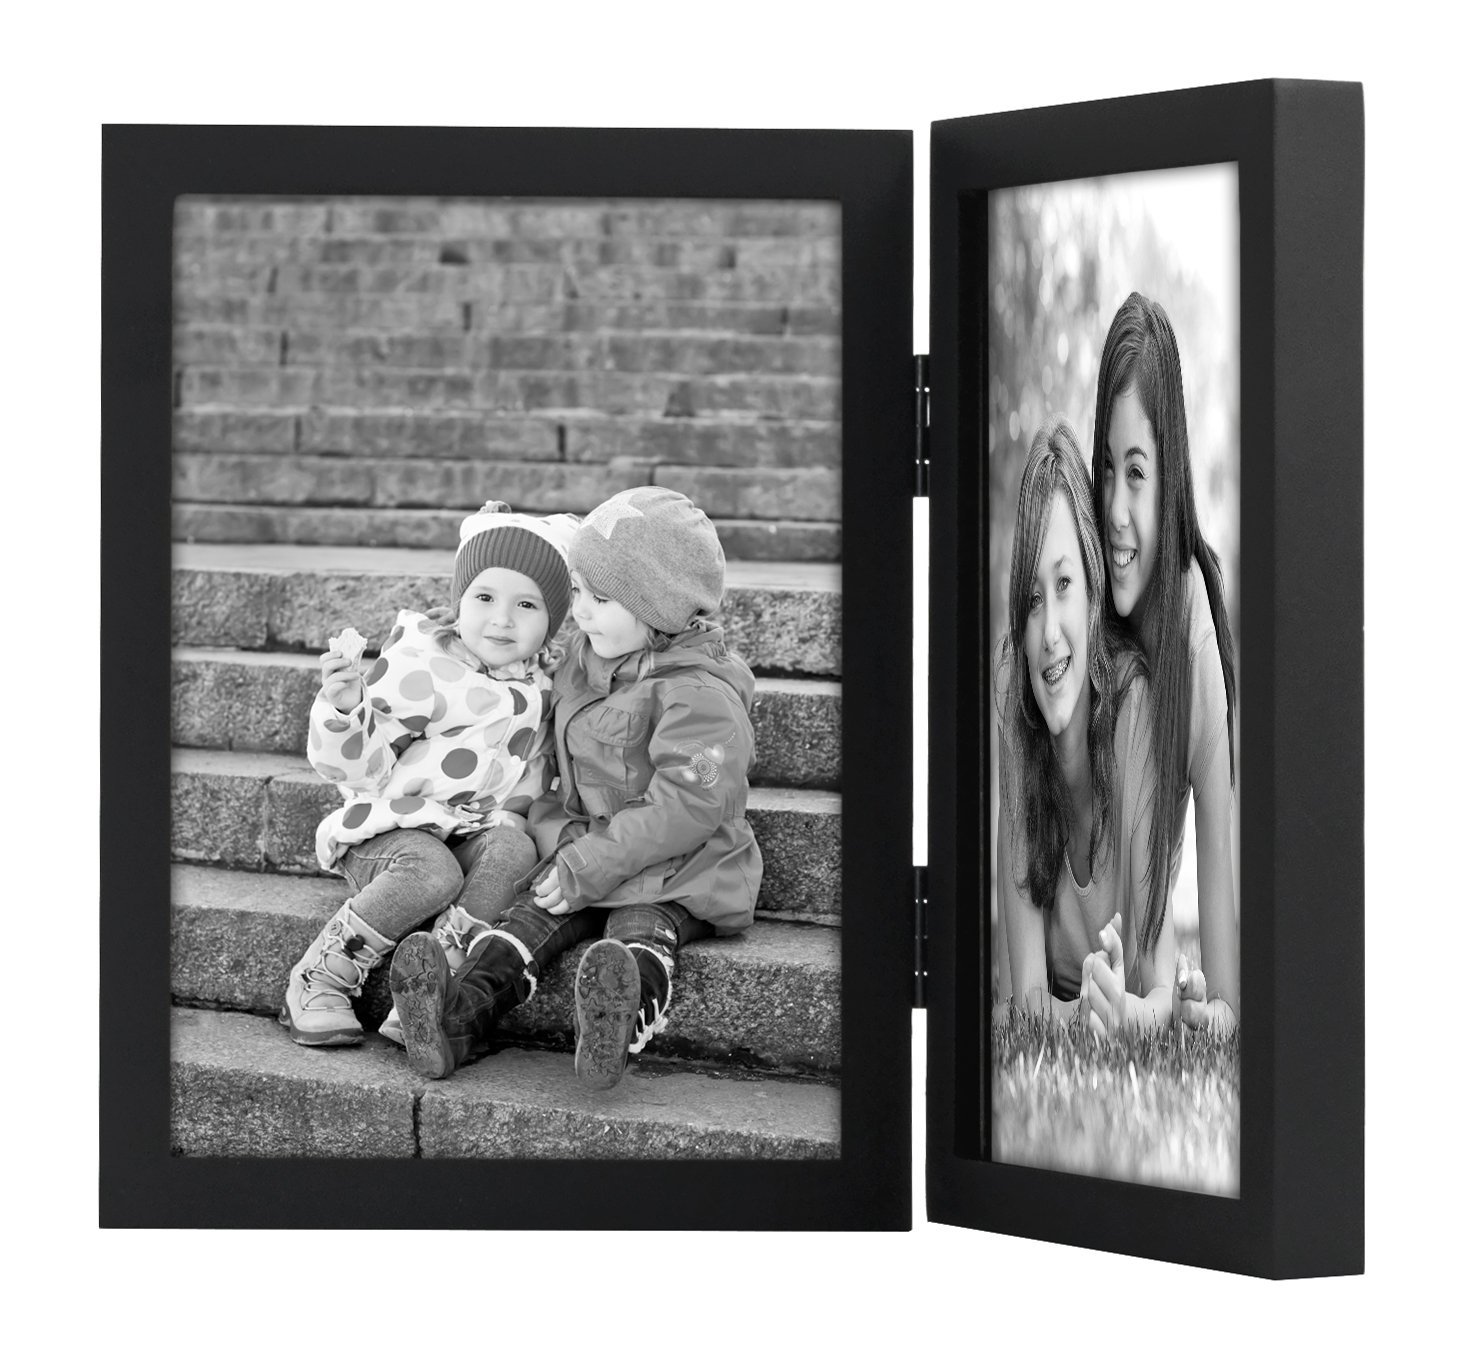 high quality wholesale 5x7 Inch Black Hinged Picture Frame with Glass Front Stands Vertically on Desktop or Table Top